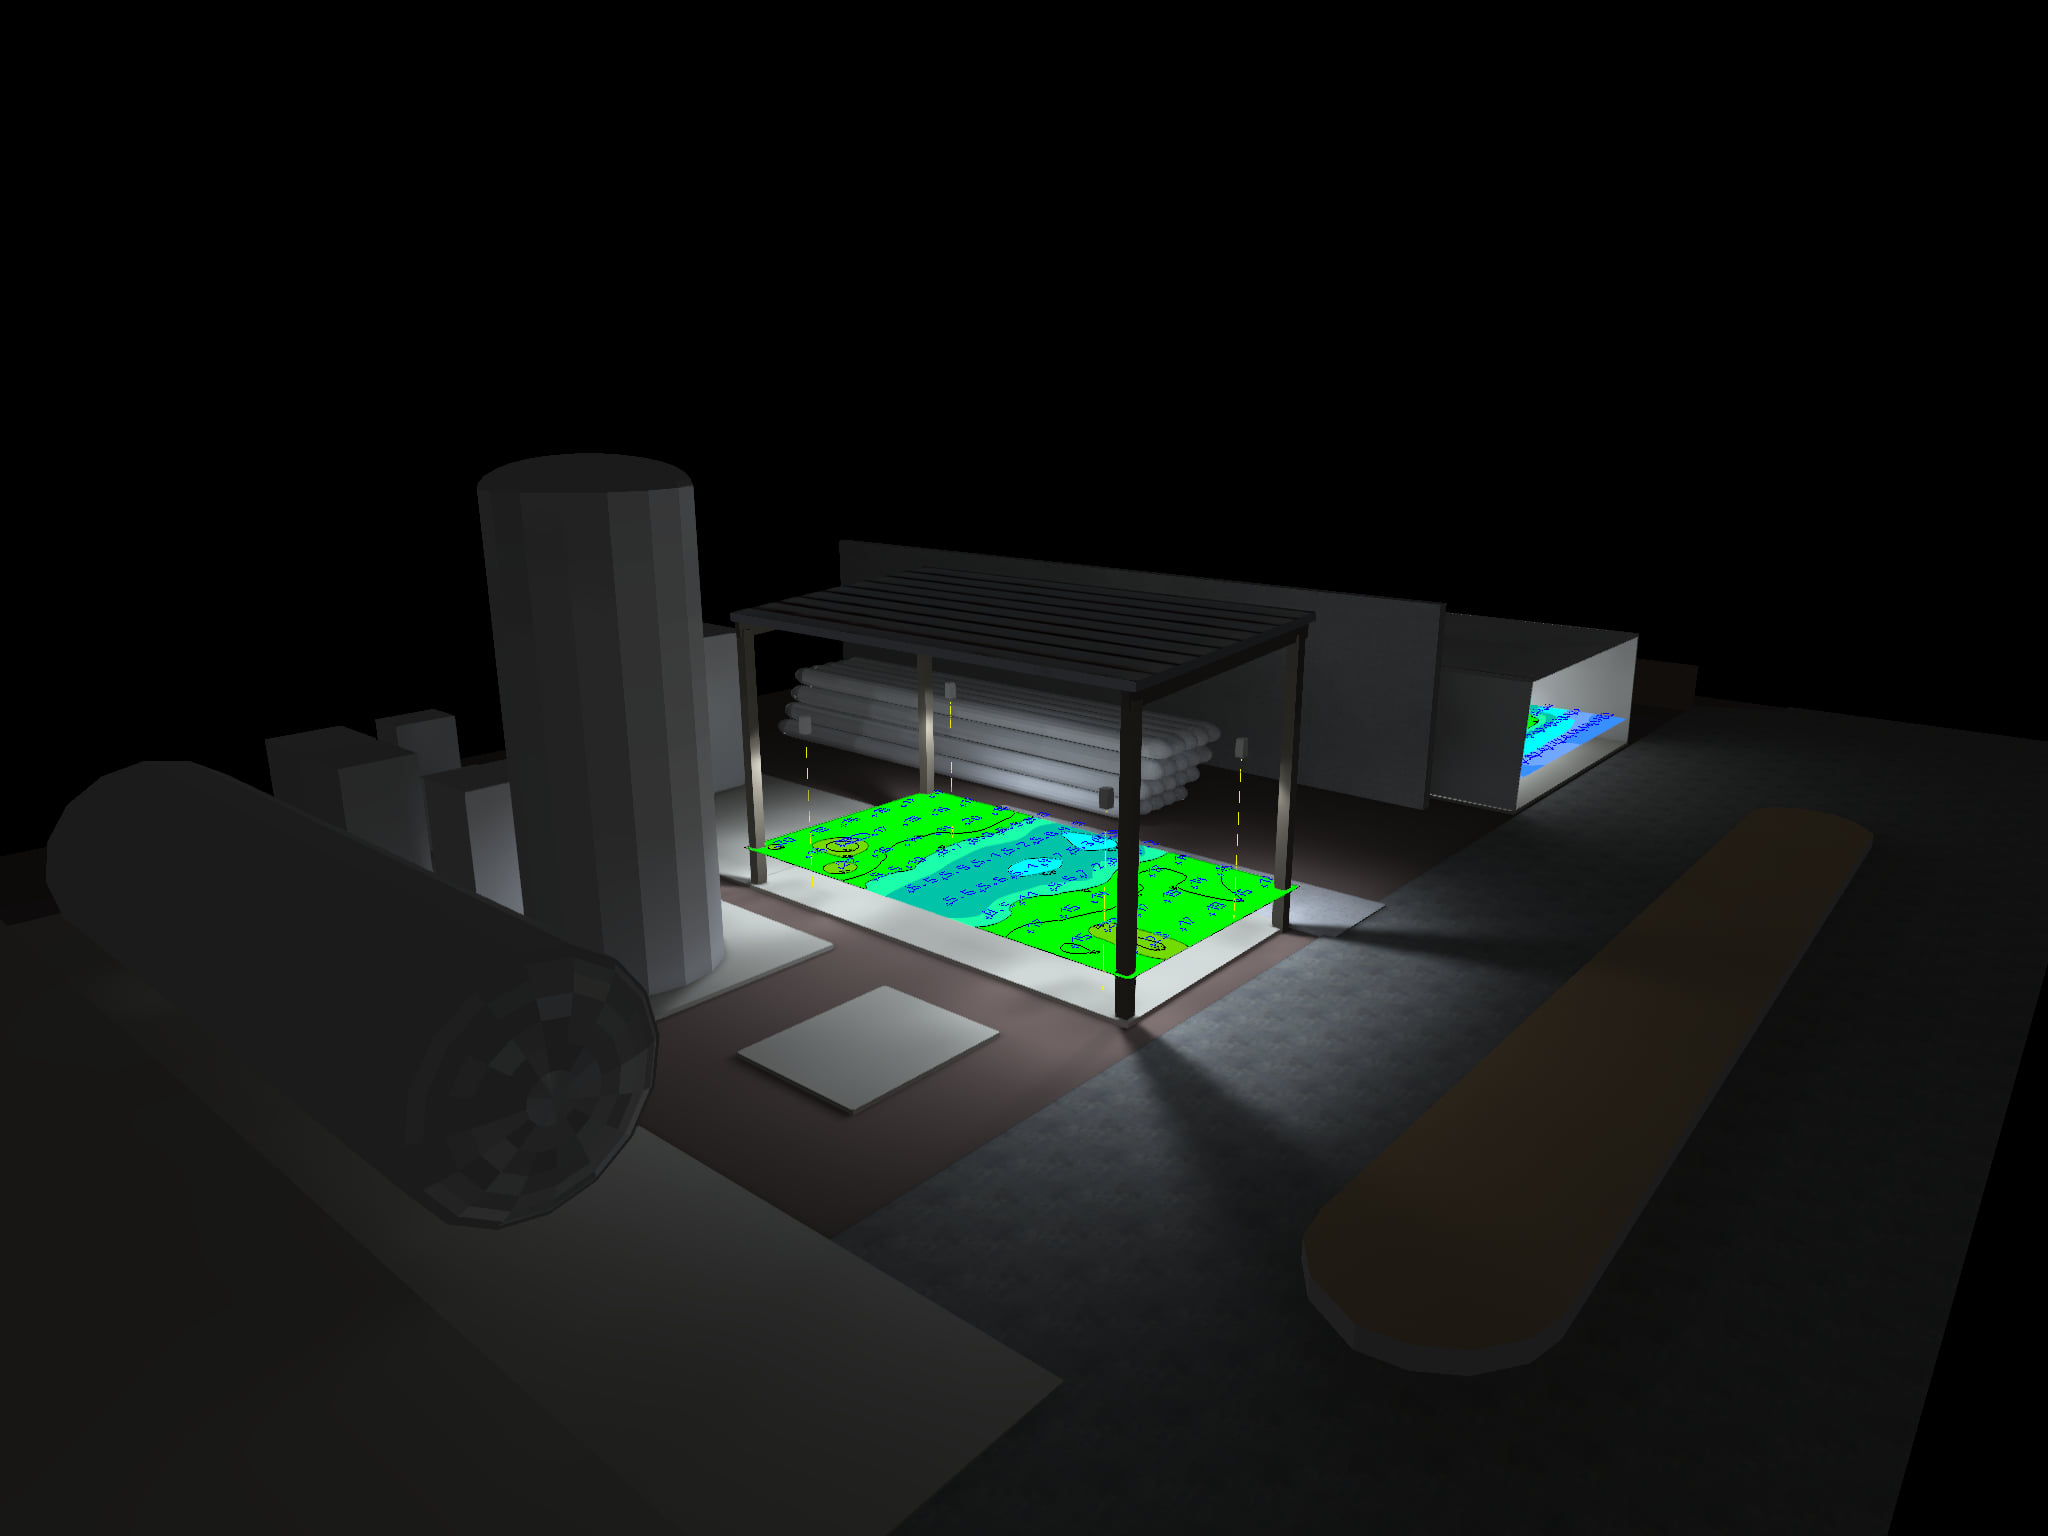 3D model of a propane filling station with a heatmap of light under a canopy